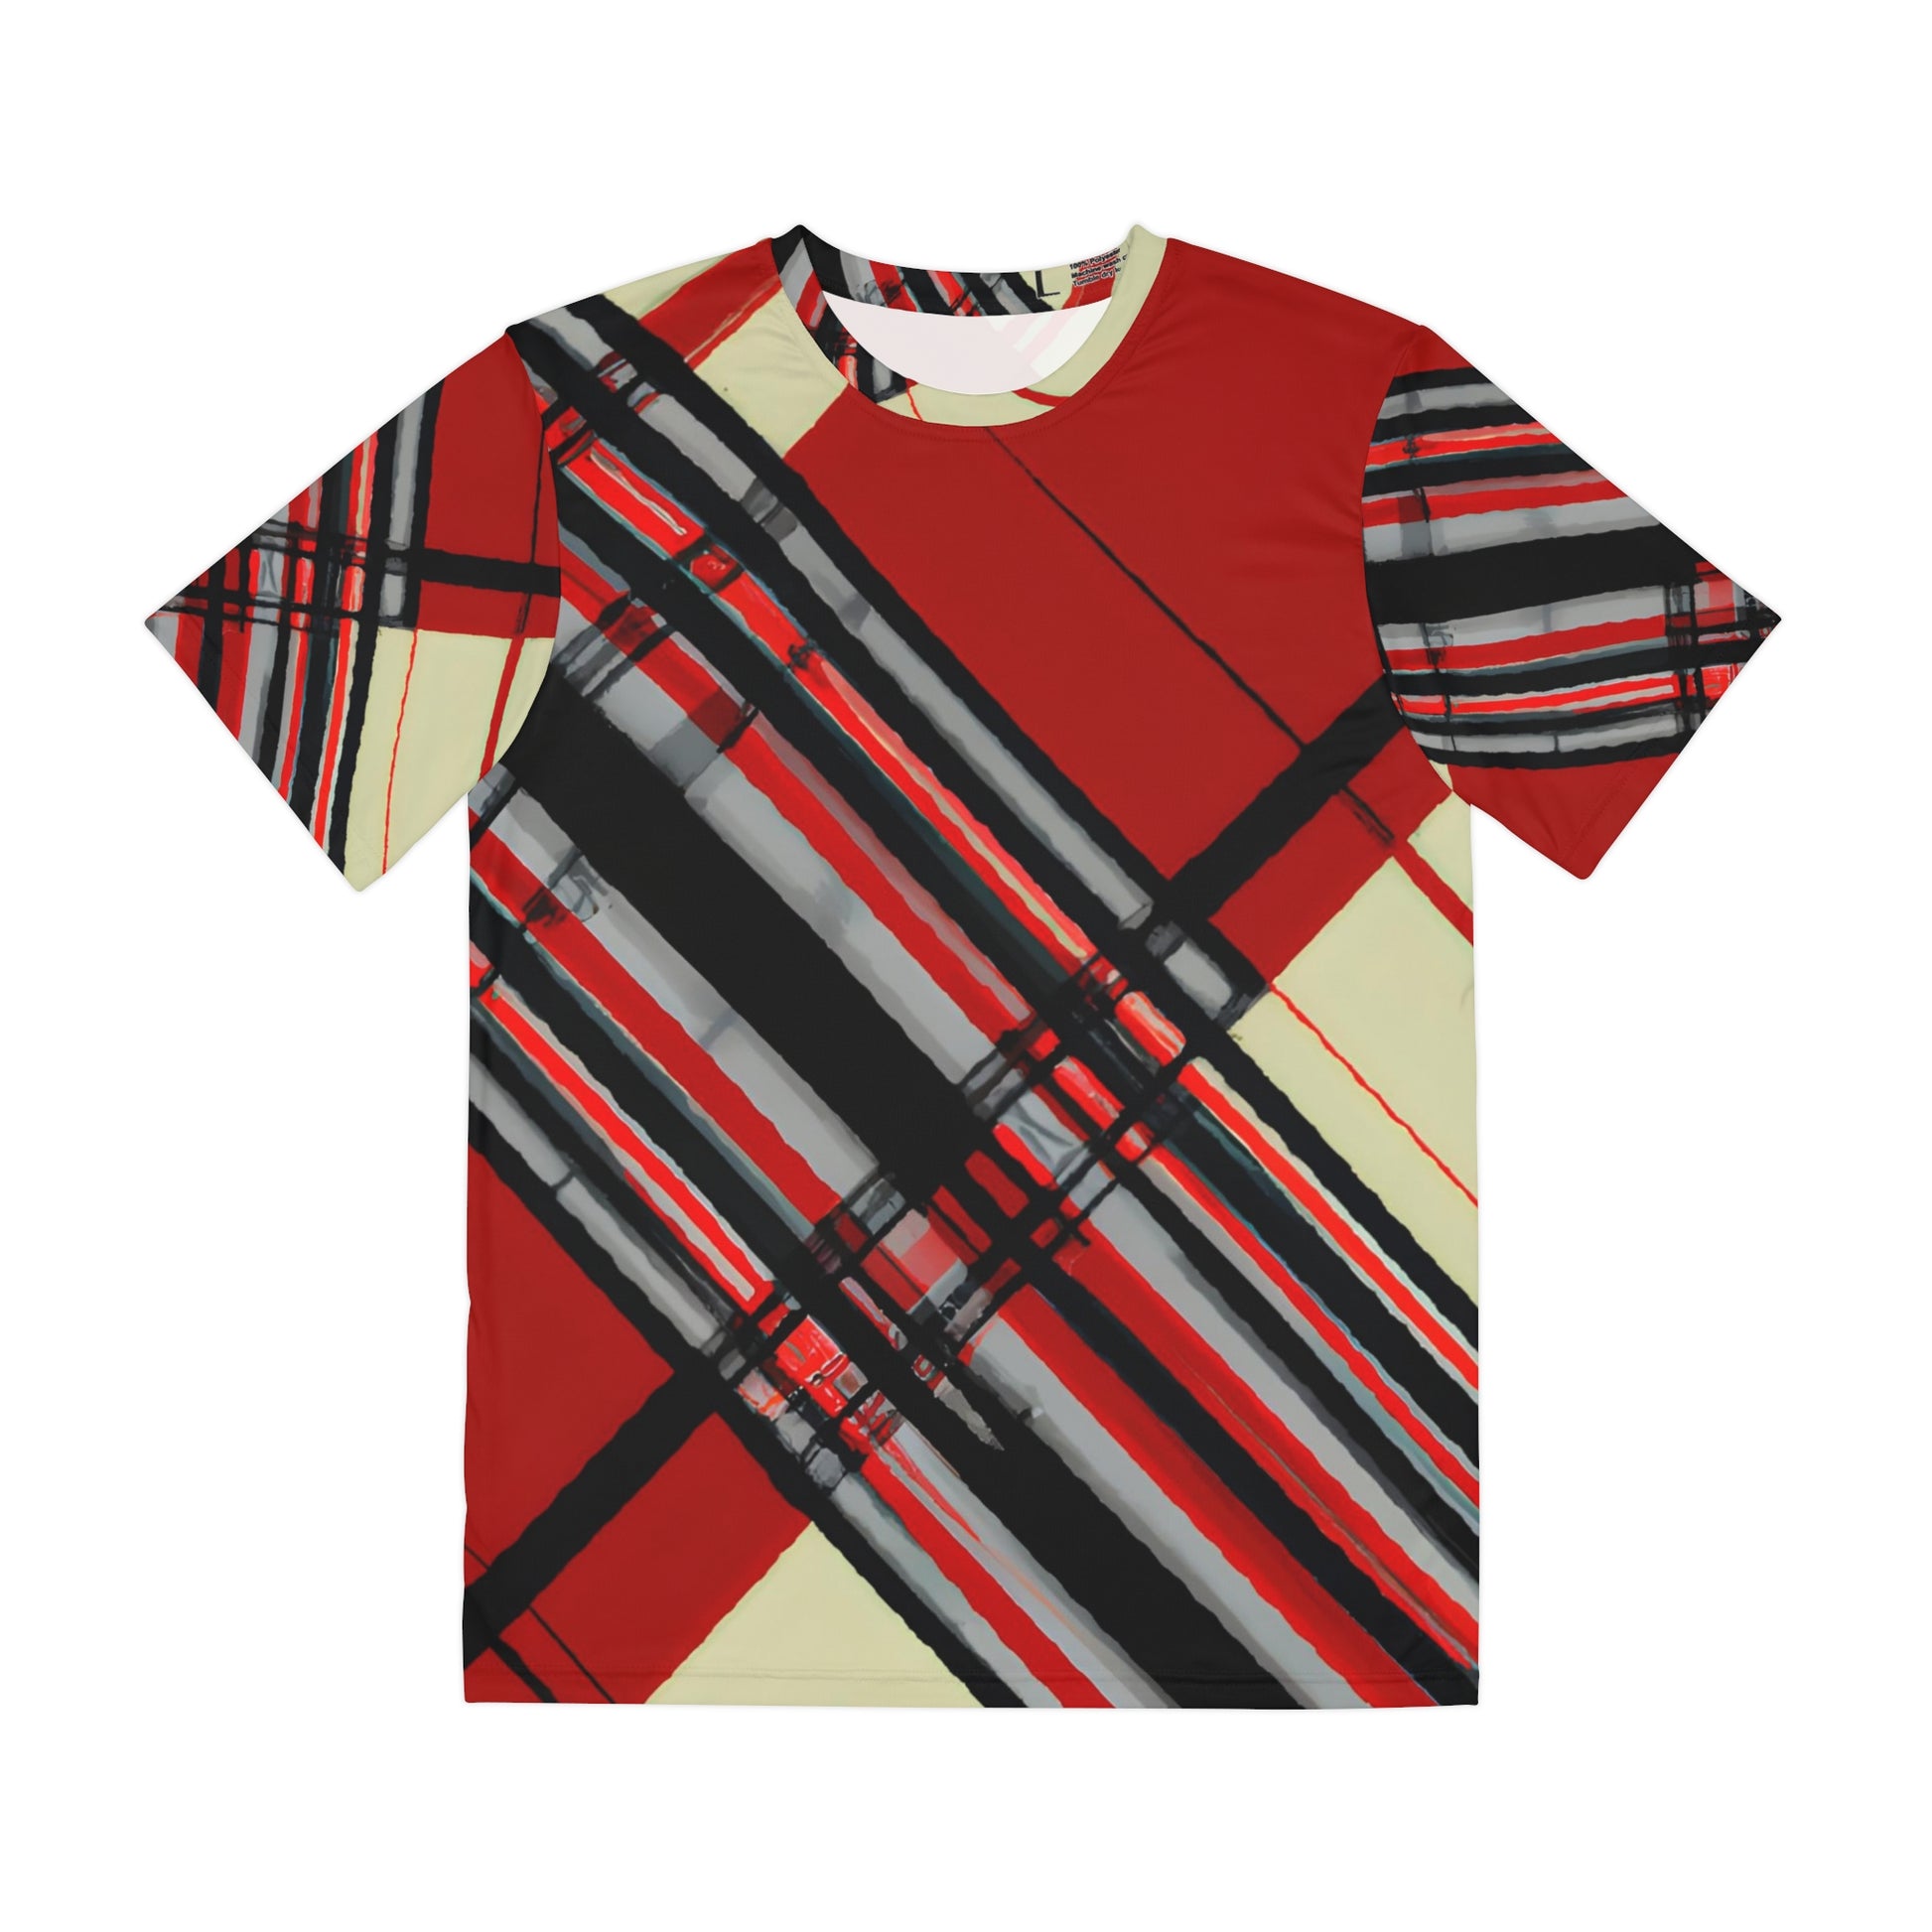 Front view of the Highland Lancer Veil Crewneck Pullover All-Over Print Short-Sleeved Shirt red black gray beige plaid pattern 